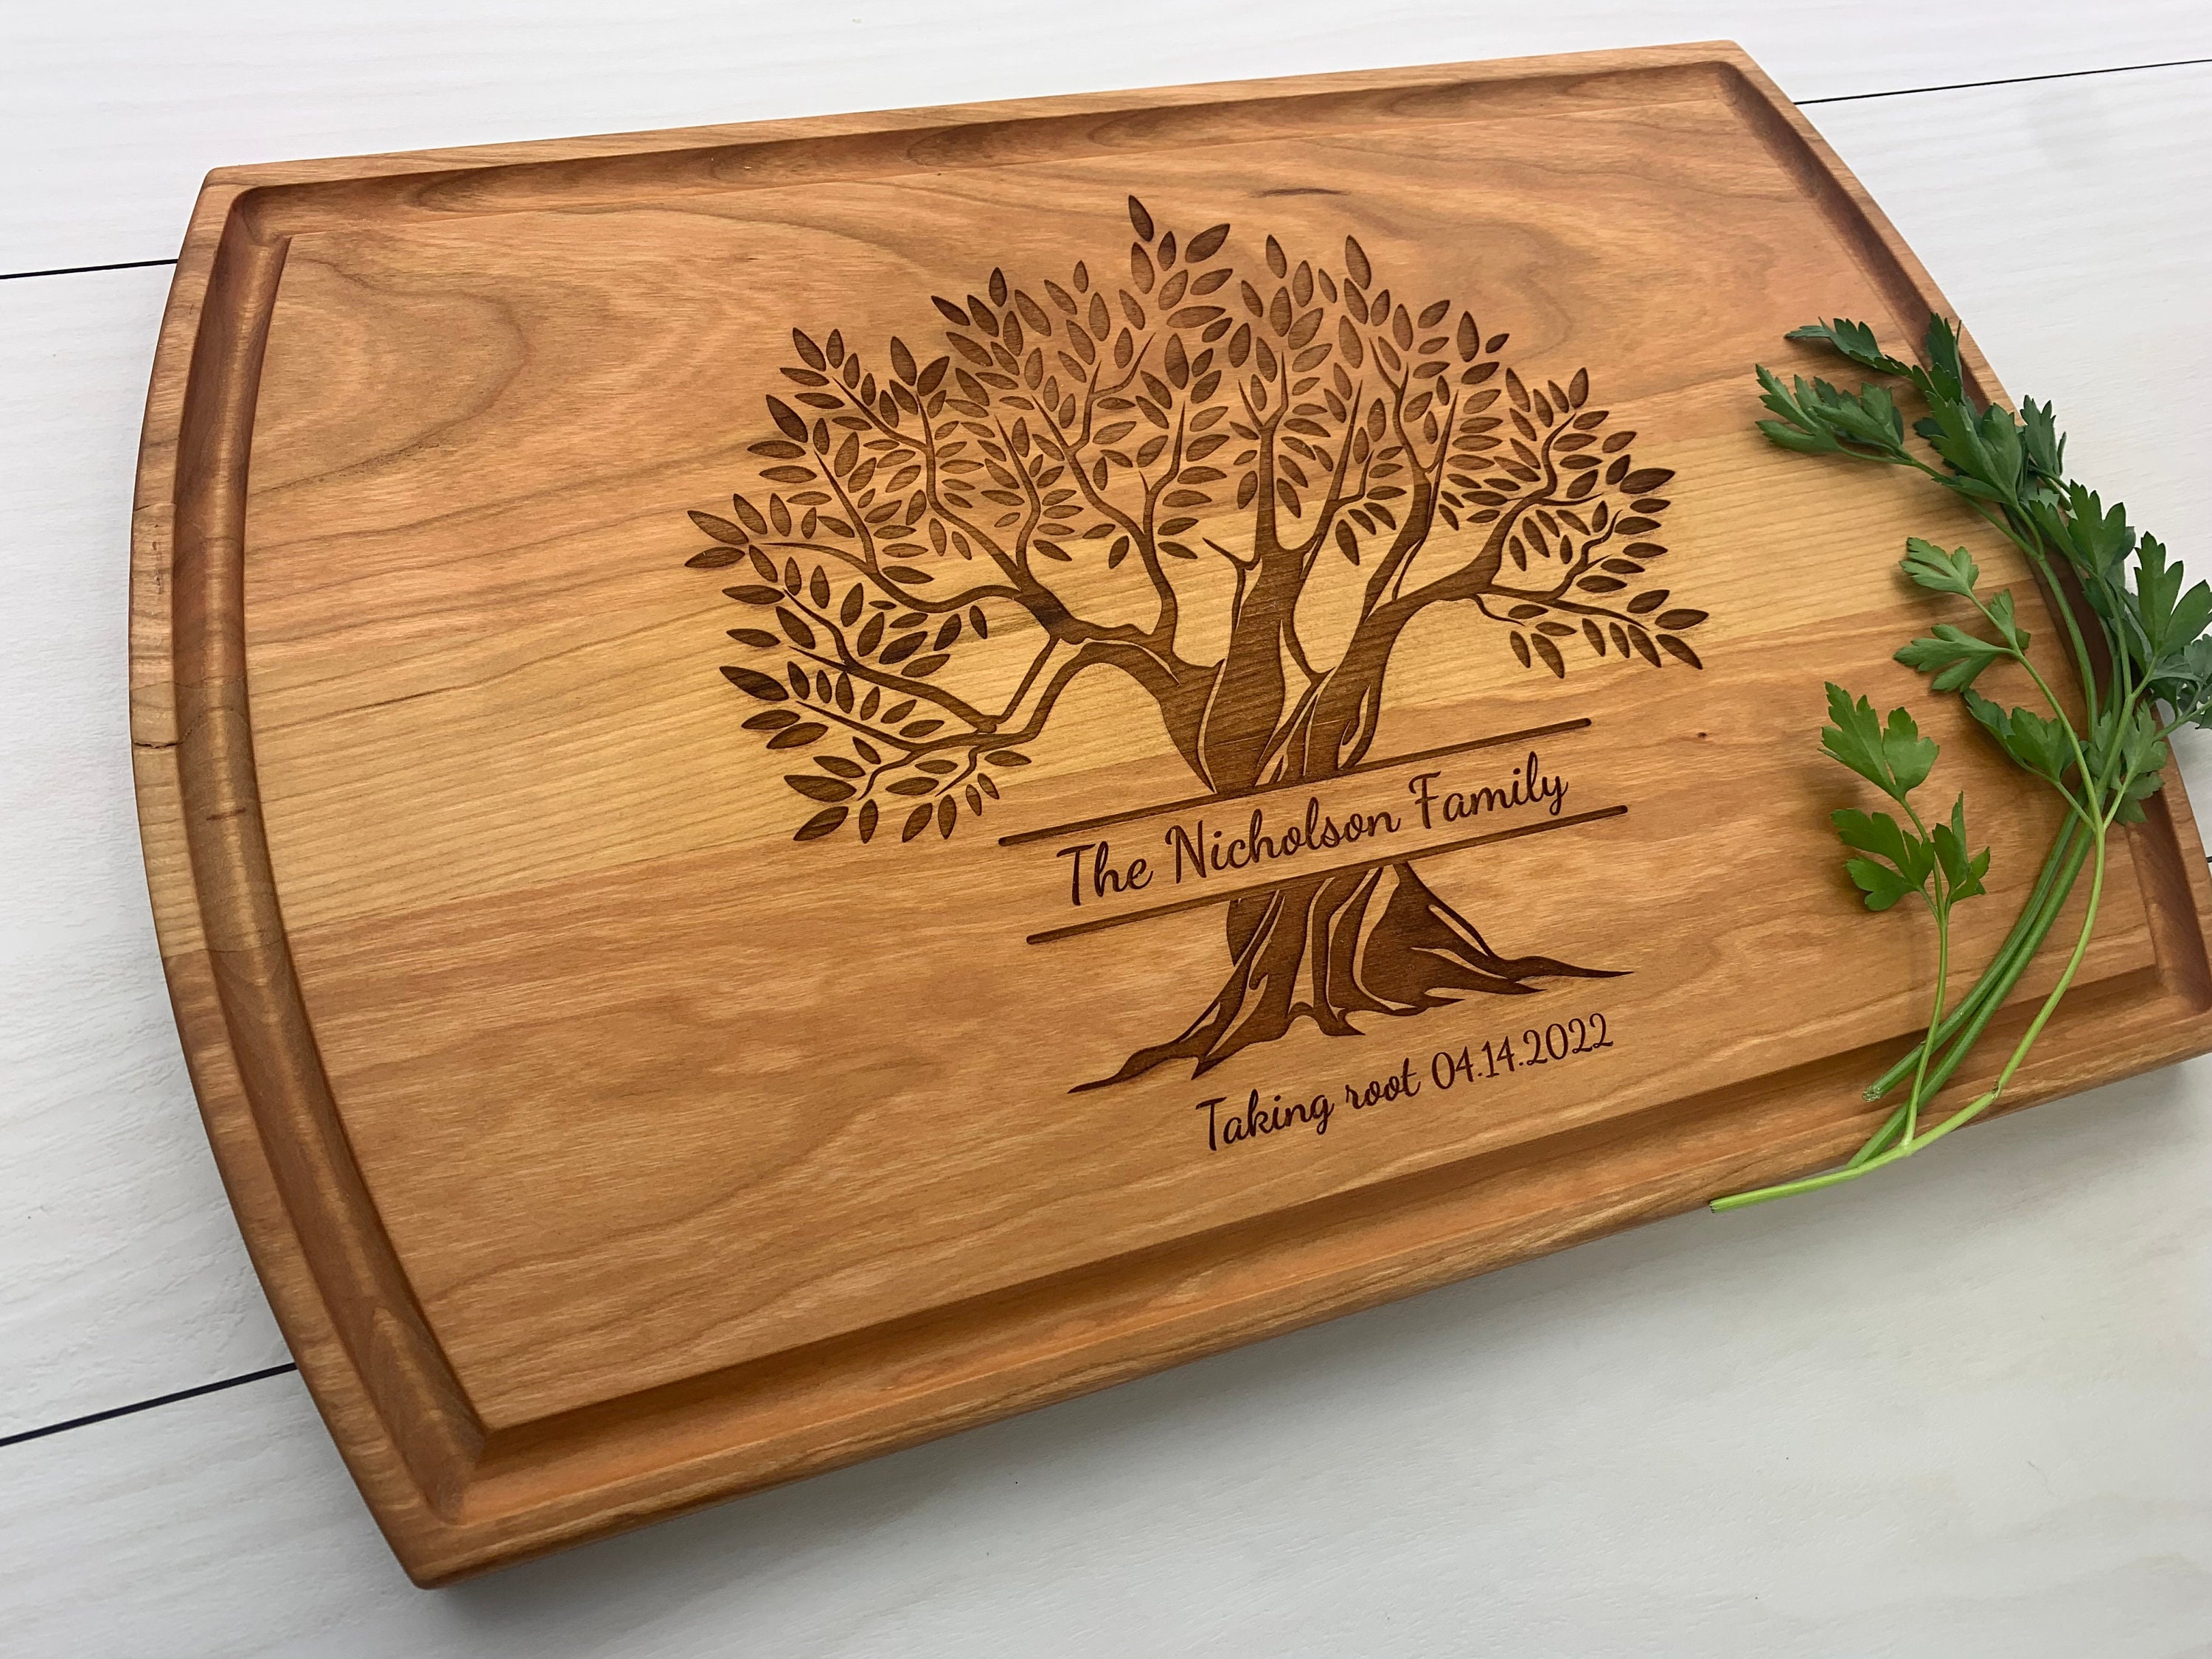 Personalized Engraved Cutting Board Congratulations Eat Drink and be Retired Retirement Couples Gift Corporate Award #702 Custom Keepsake 